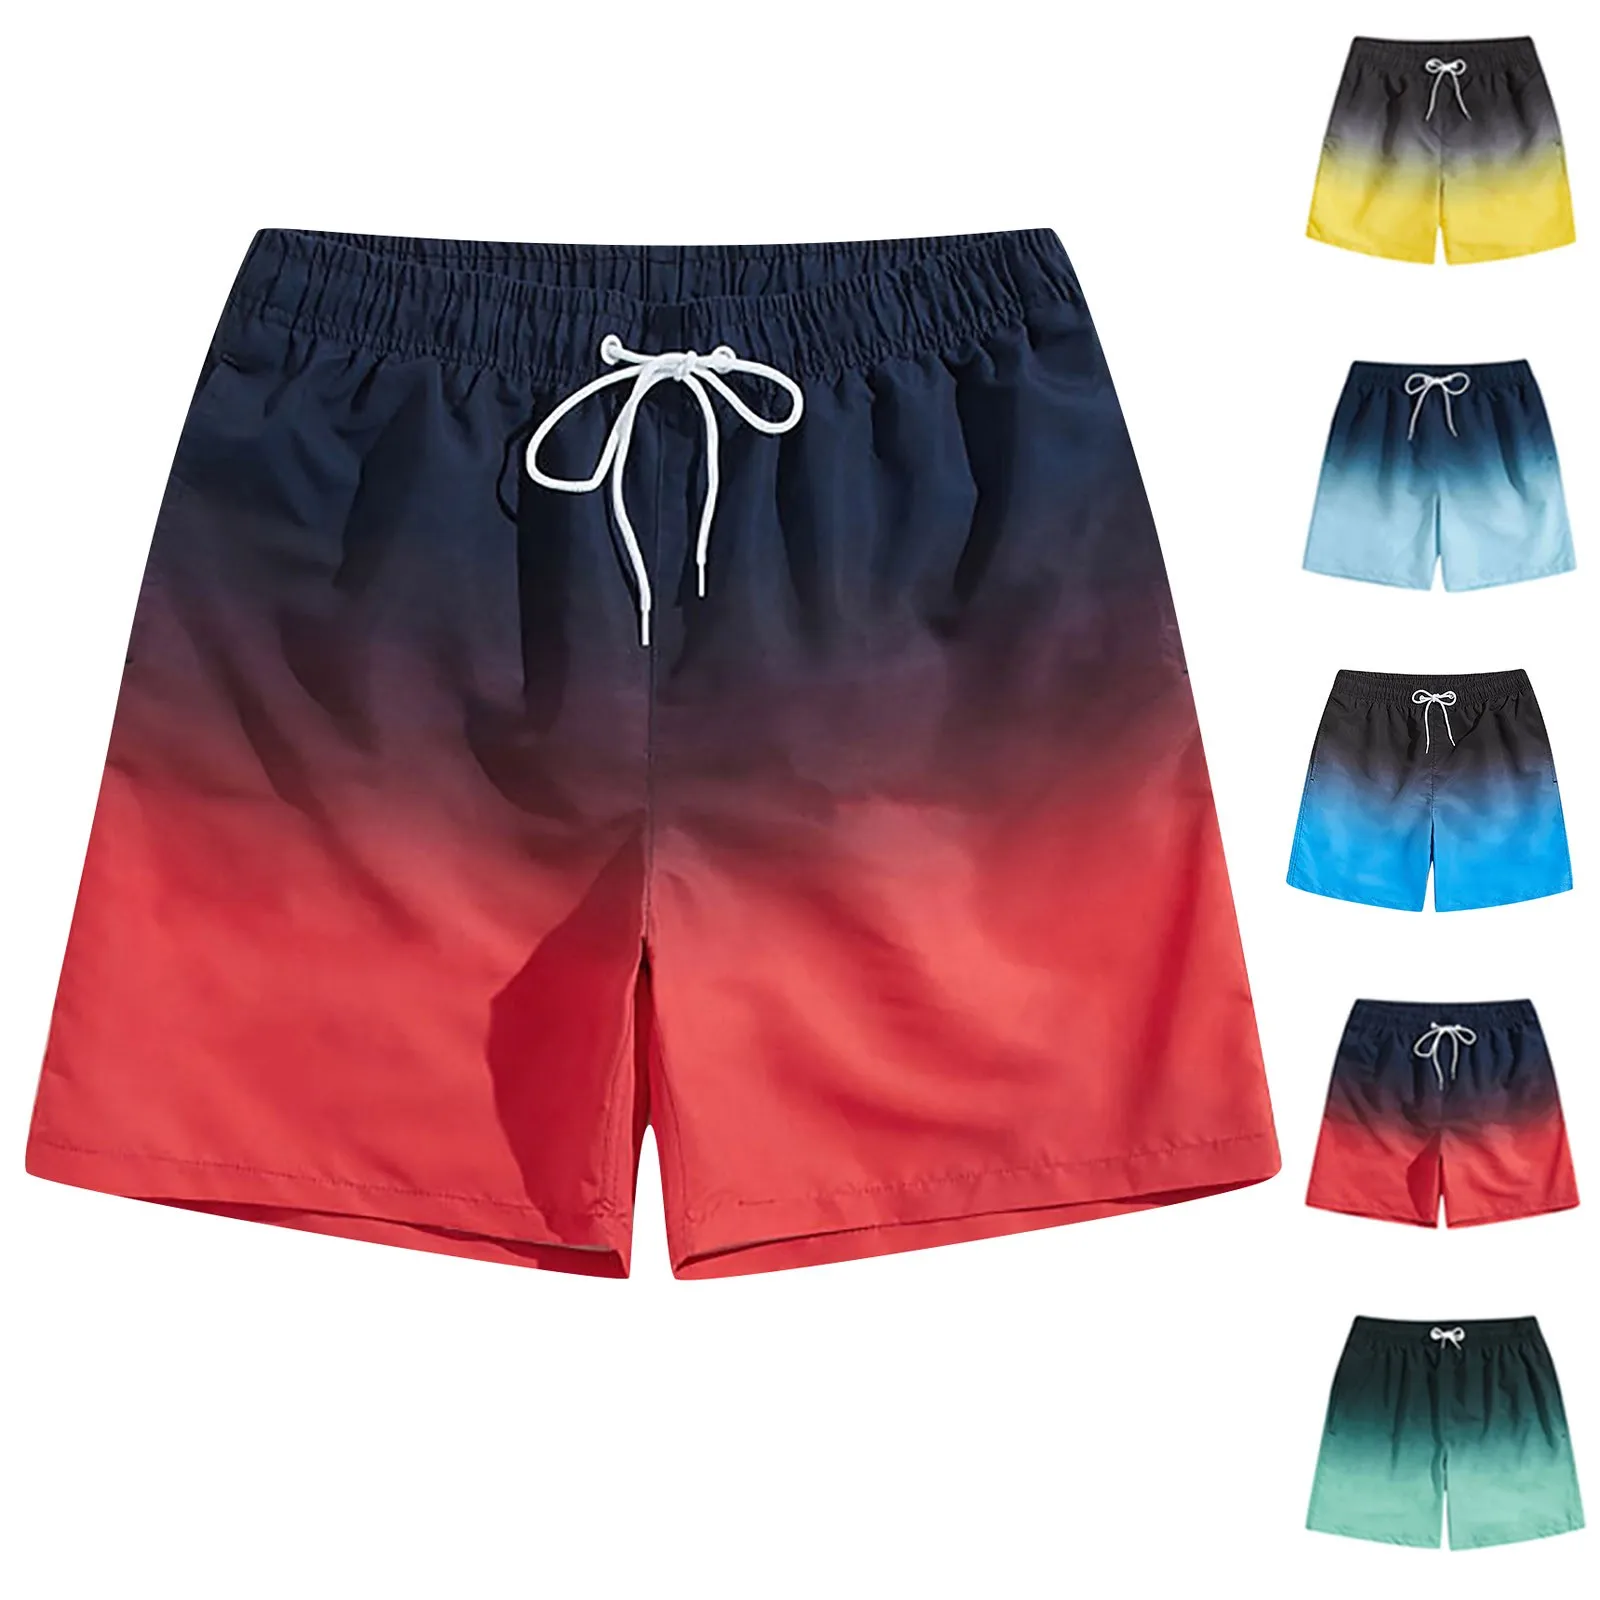 

Color Changing Swim Shorts For Men Boys Bathing Suit 2022 Quick Dry Beach Swimming Trunks Water Hot Discoloration Board Shorts